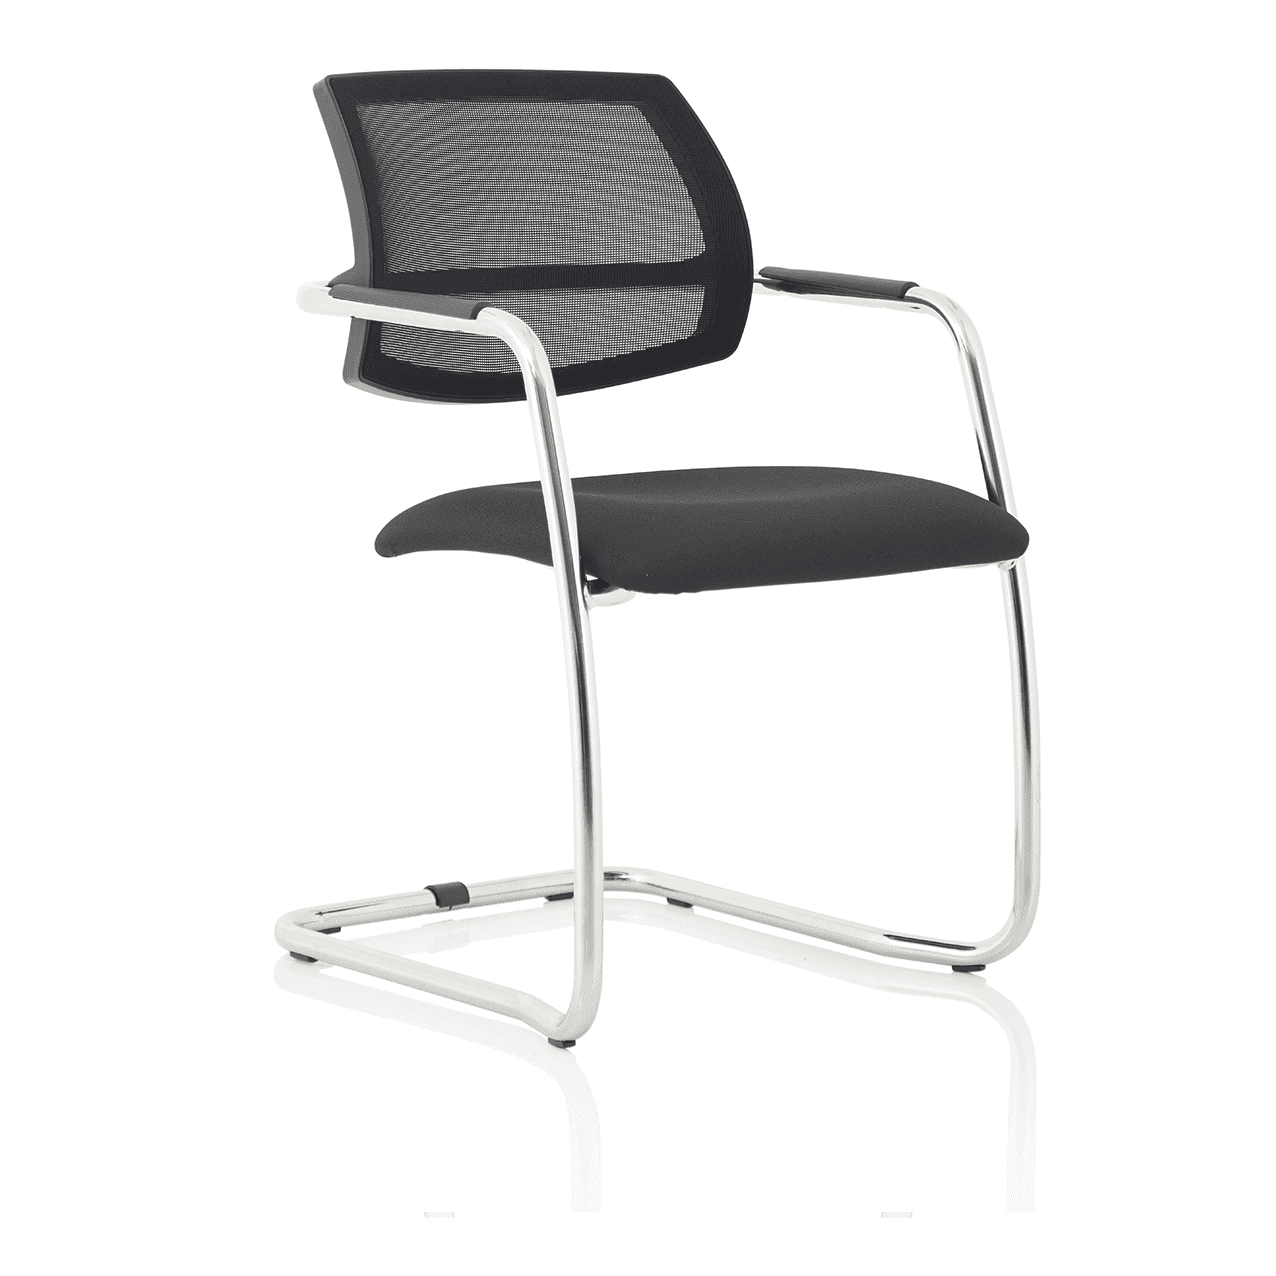 Swift Medium Back Cantilever Visitor Chair - Pre-Assembled, Stackable, Mesh & Fabric, Chrome Metal Frame, 115kg Capacity, 6hr Usage, 2yr Guarantee